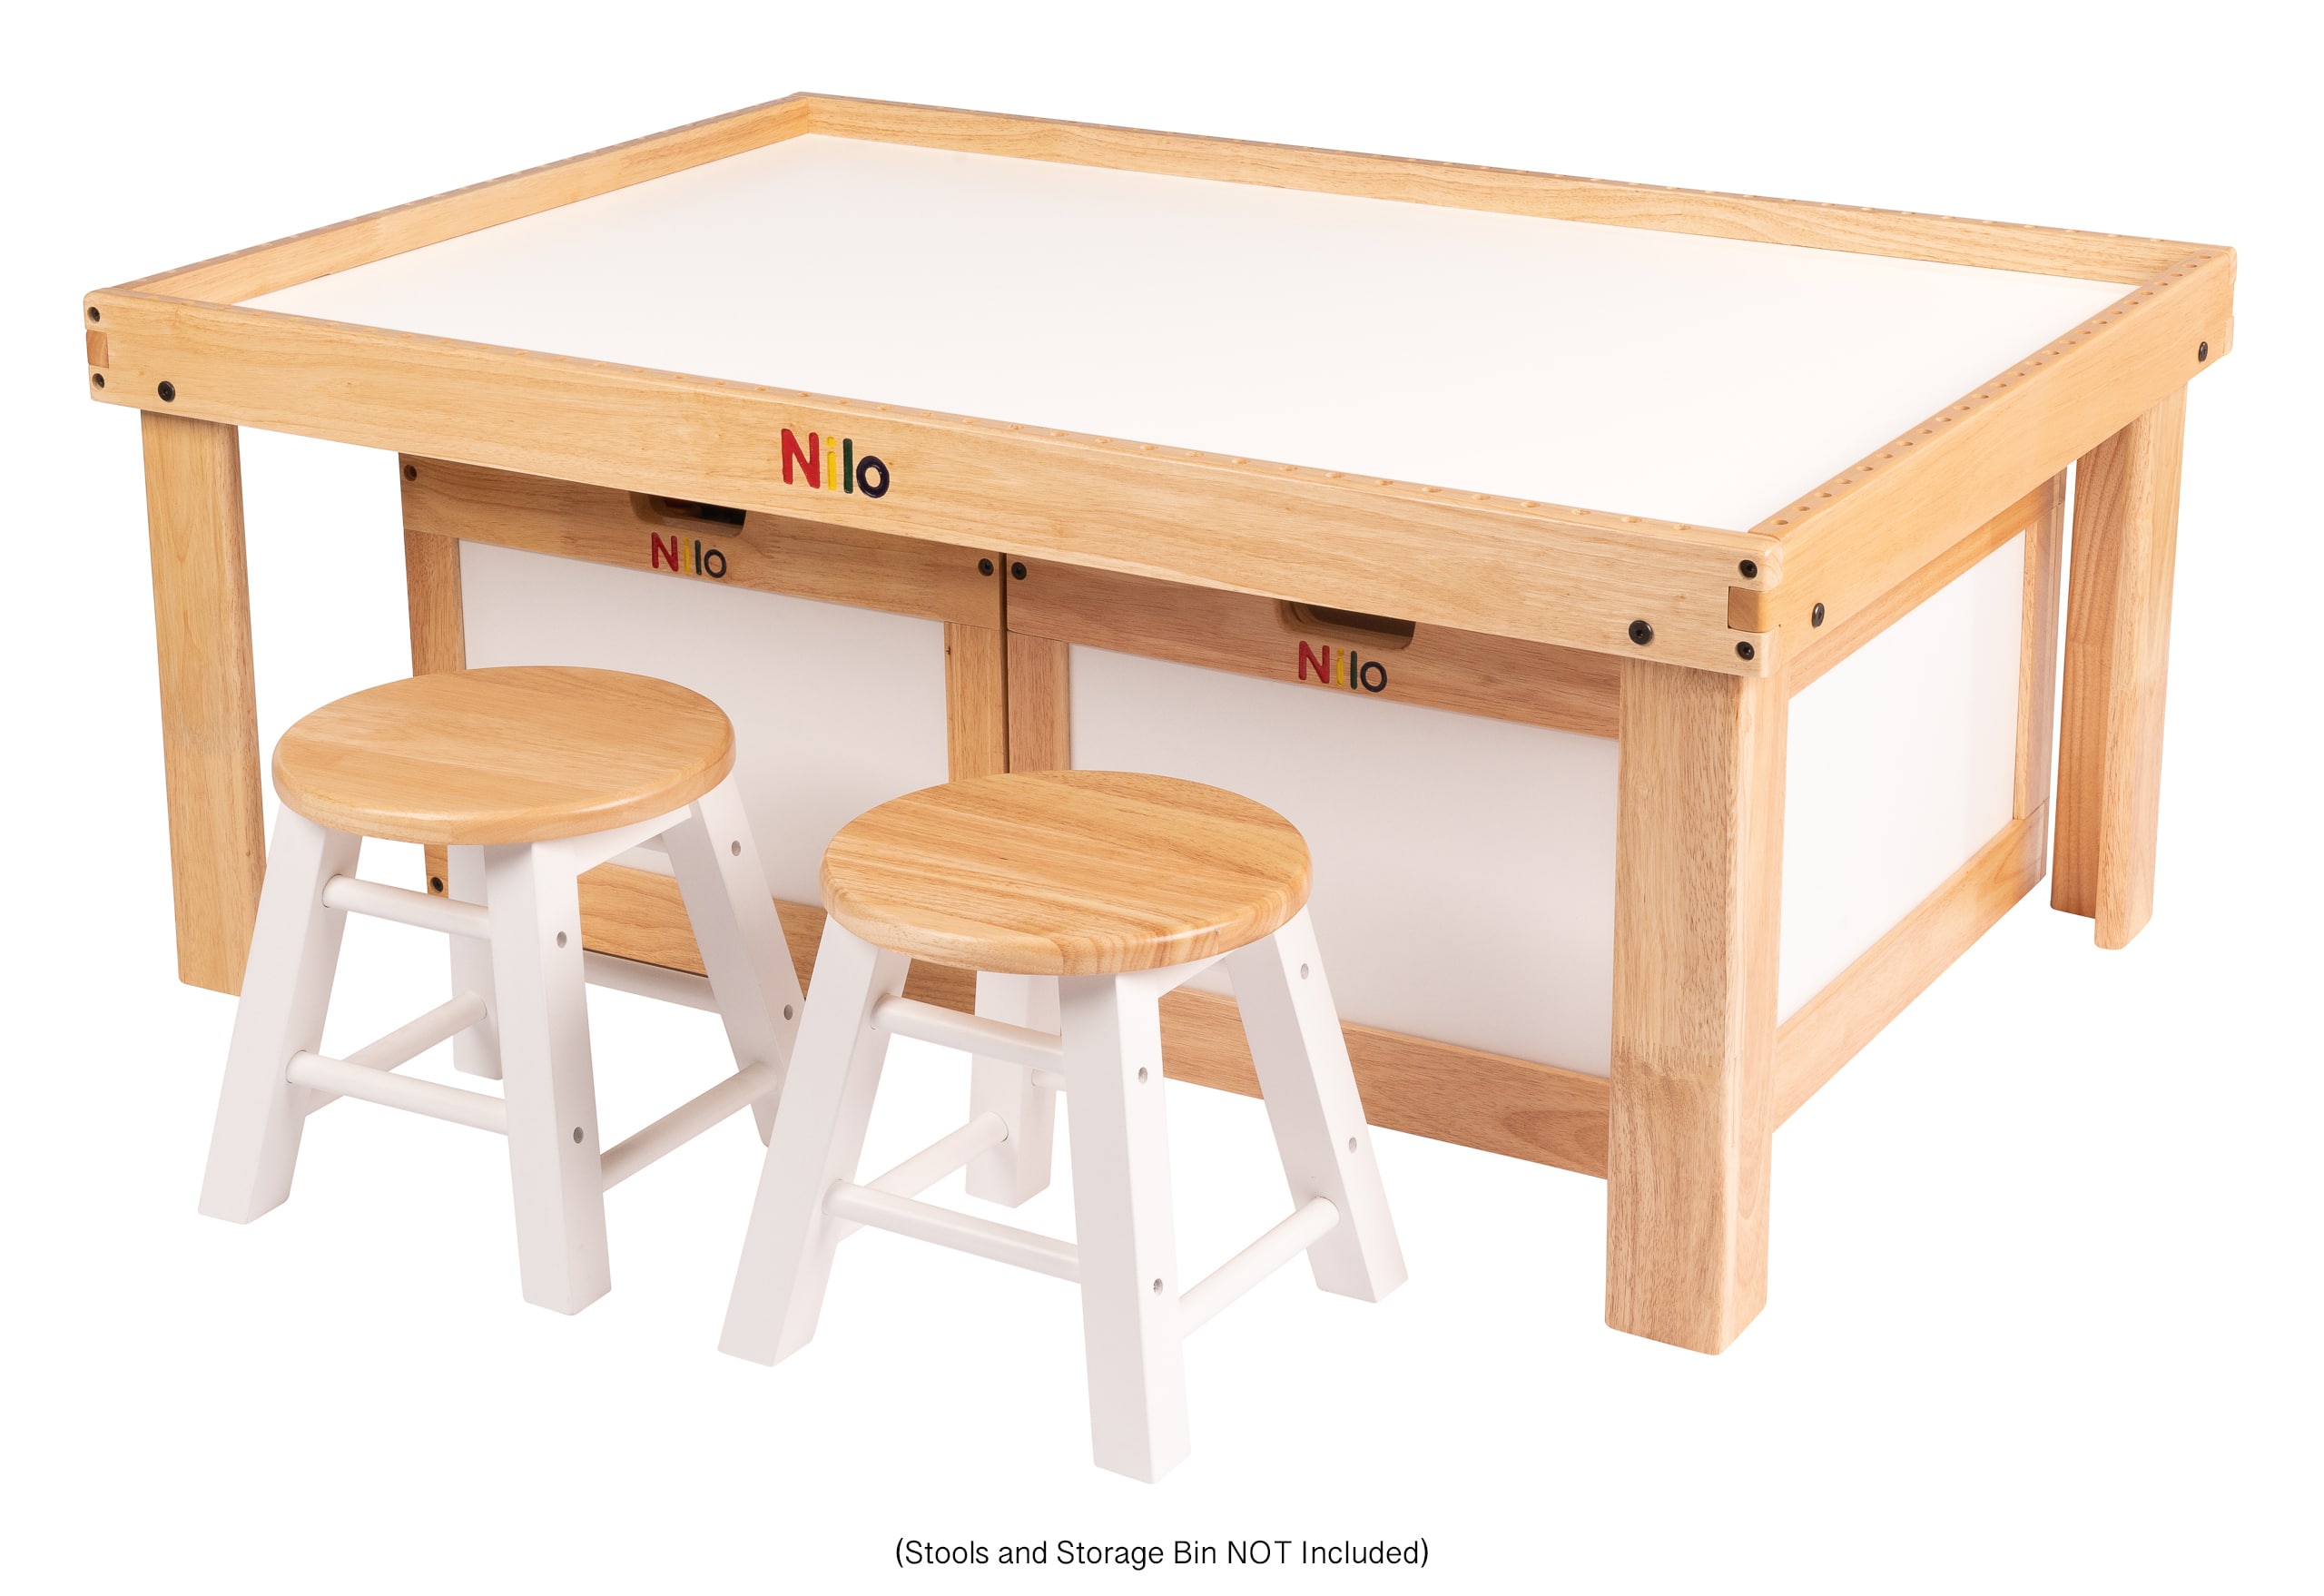 Large Activity Table